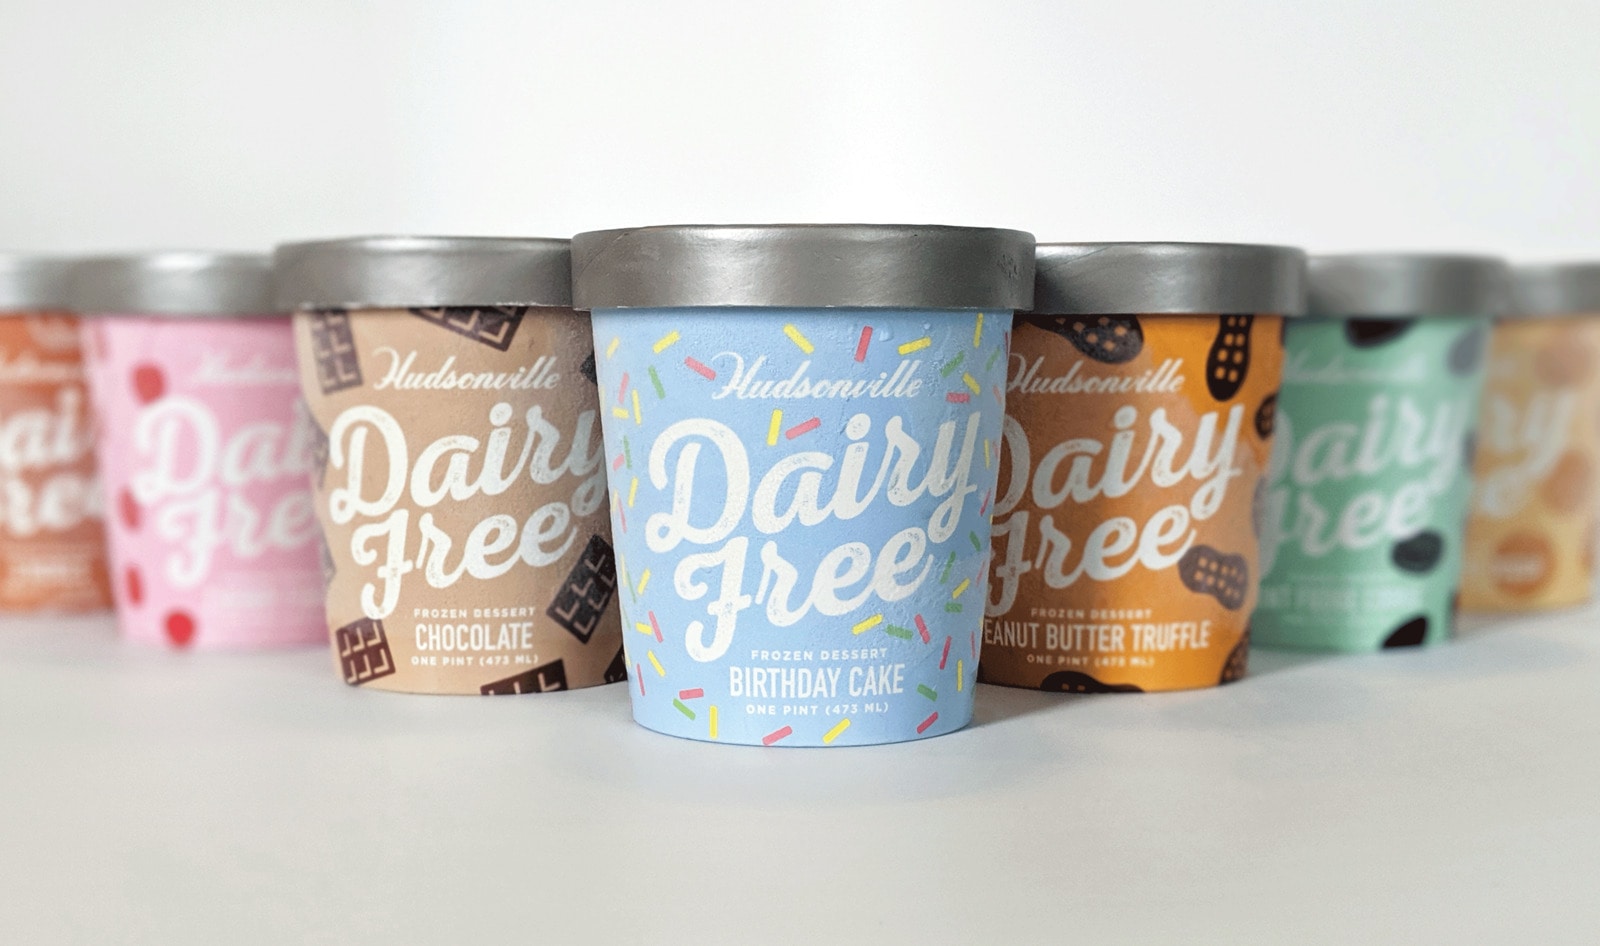 Midwest Dairy Brand Launches Its First Vegan Ice Cream Line&nbsp;